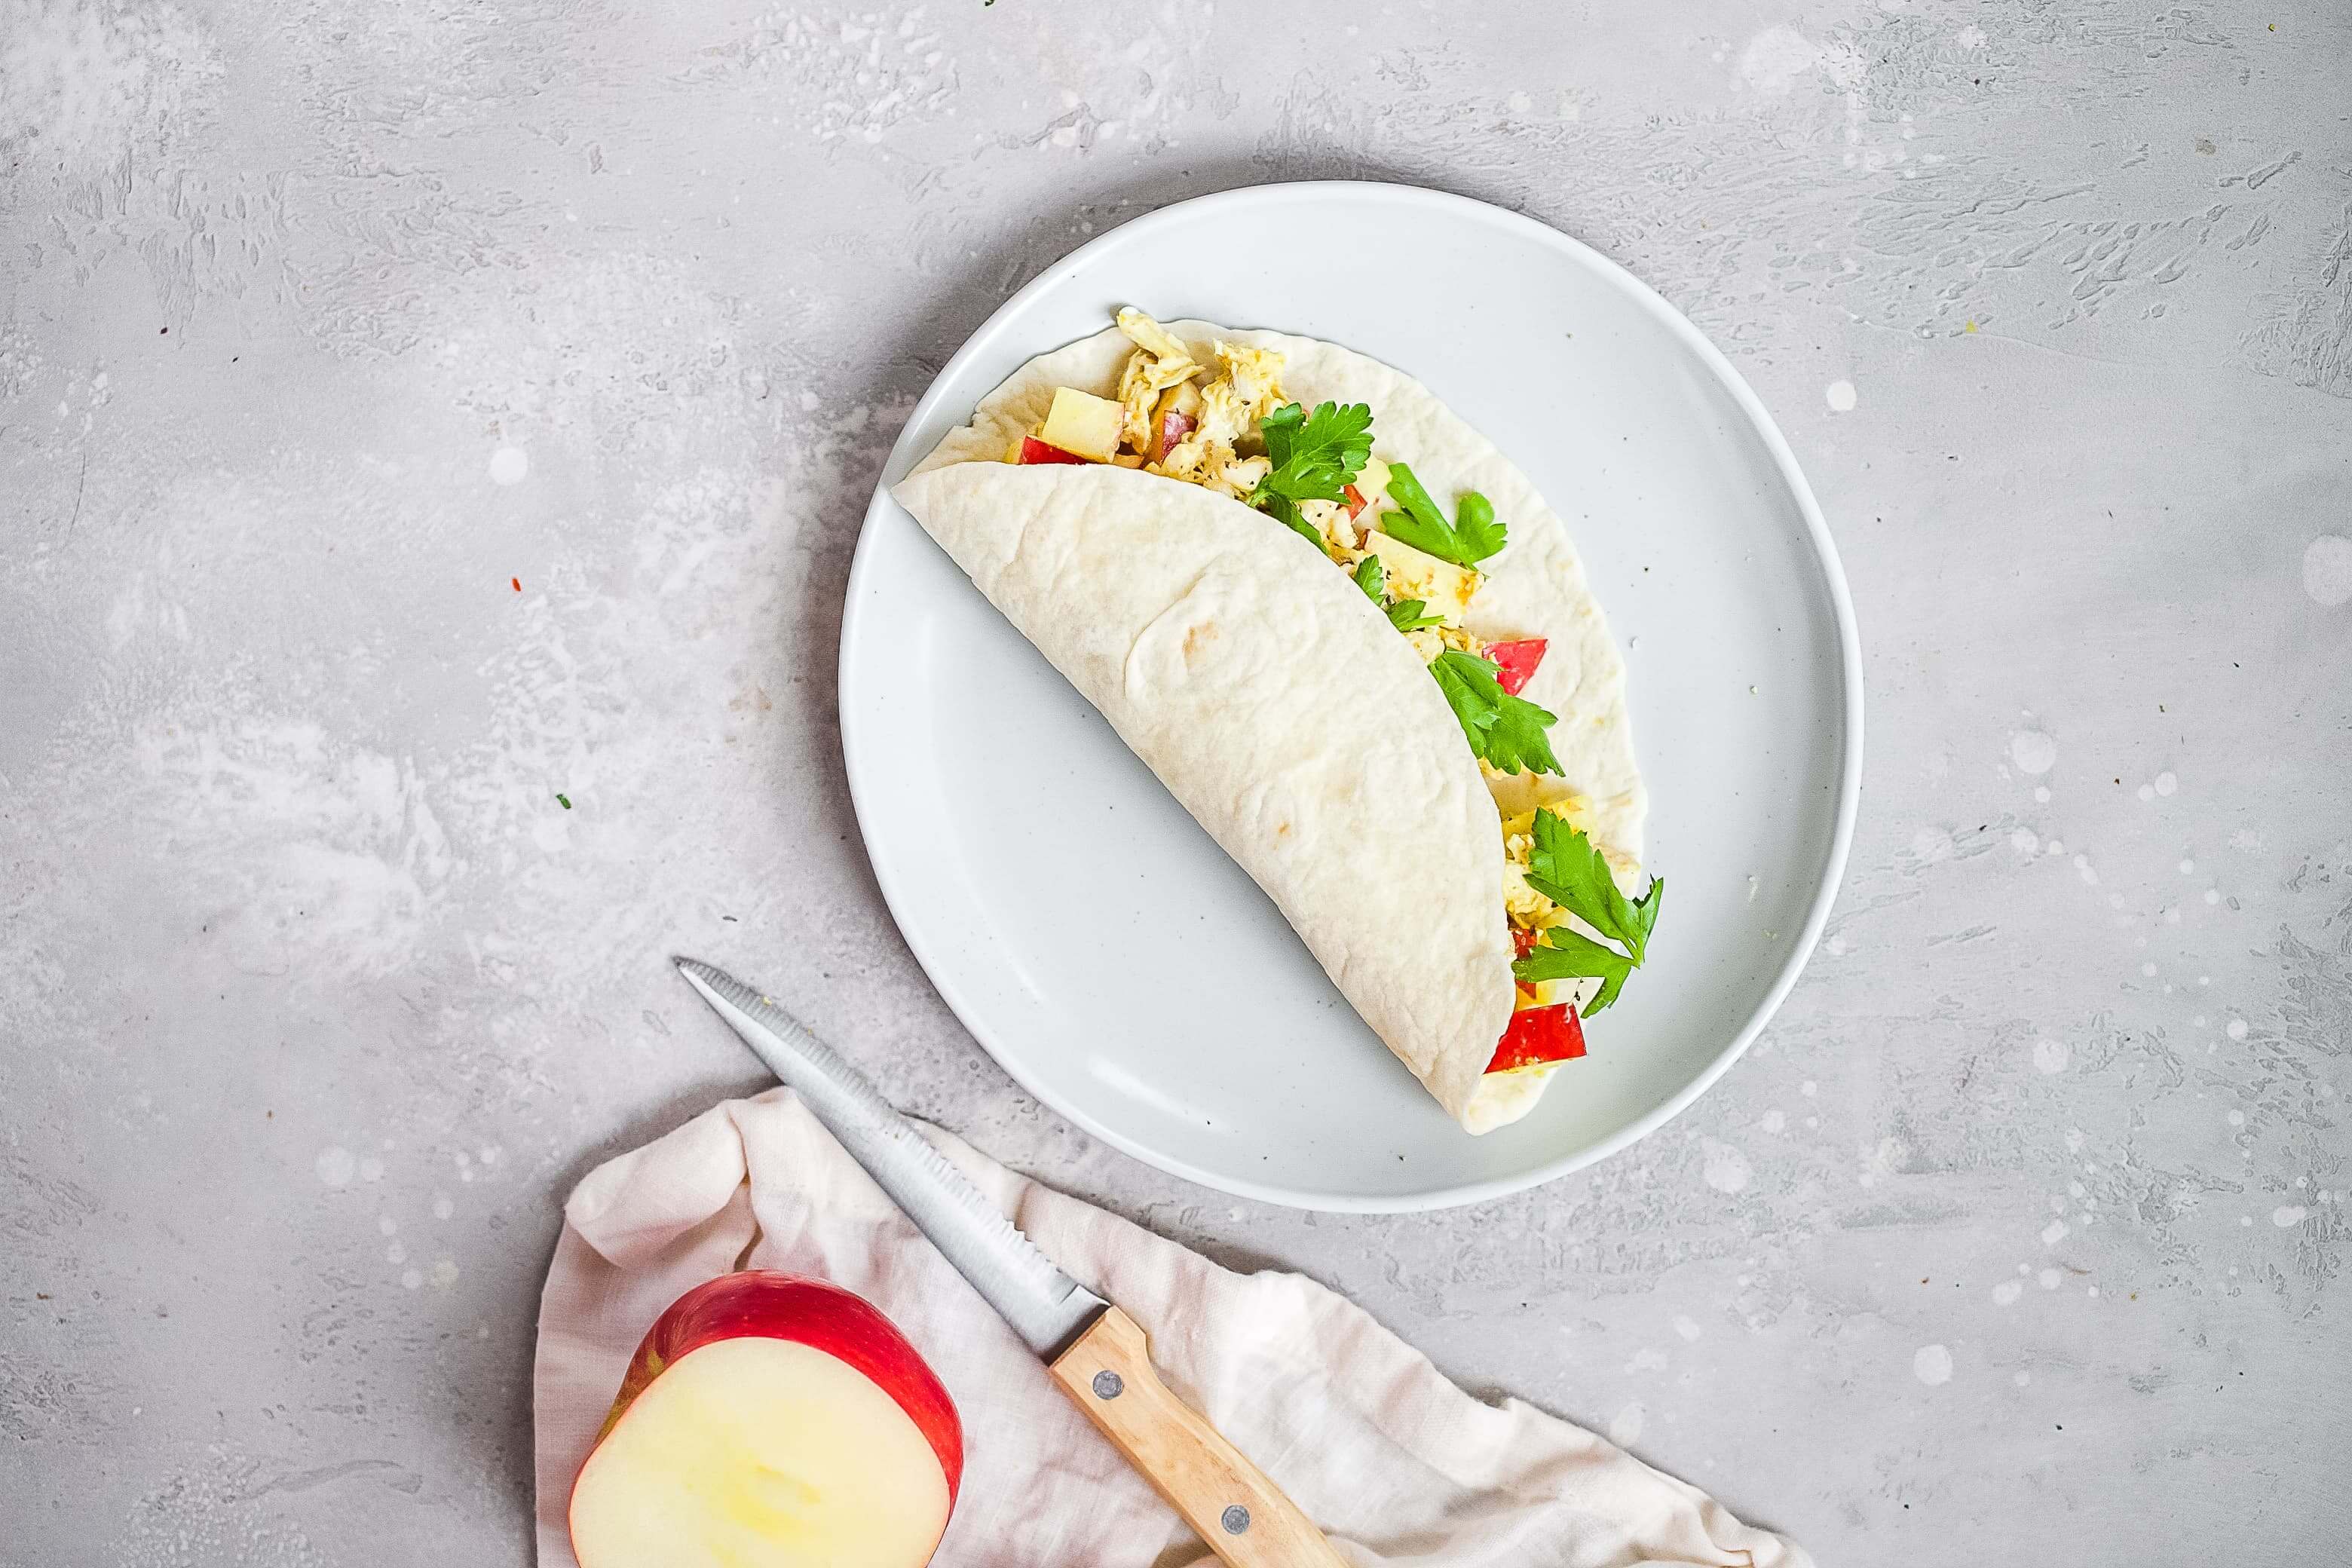 20 Meal Ideas to Support Student-Athletes: Curried Chicken Wrap